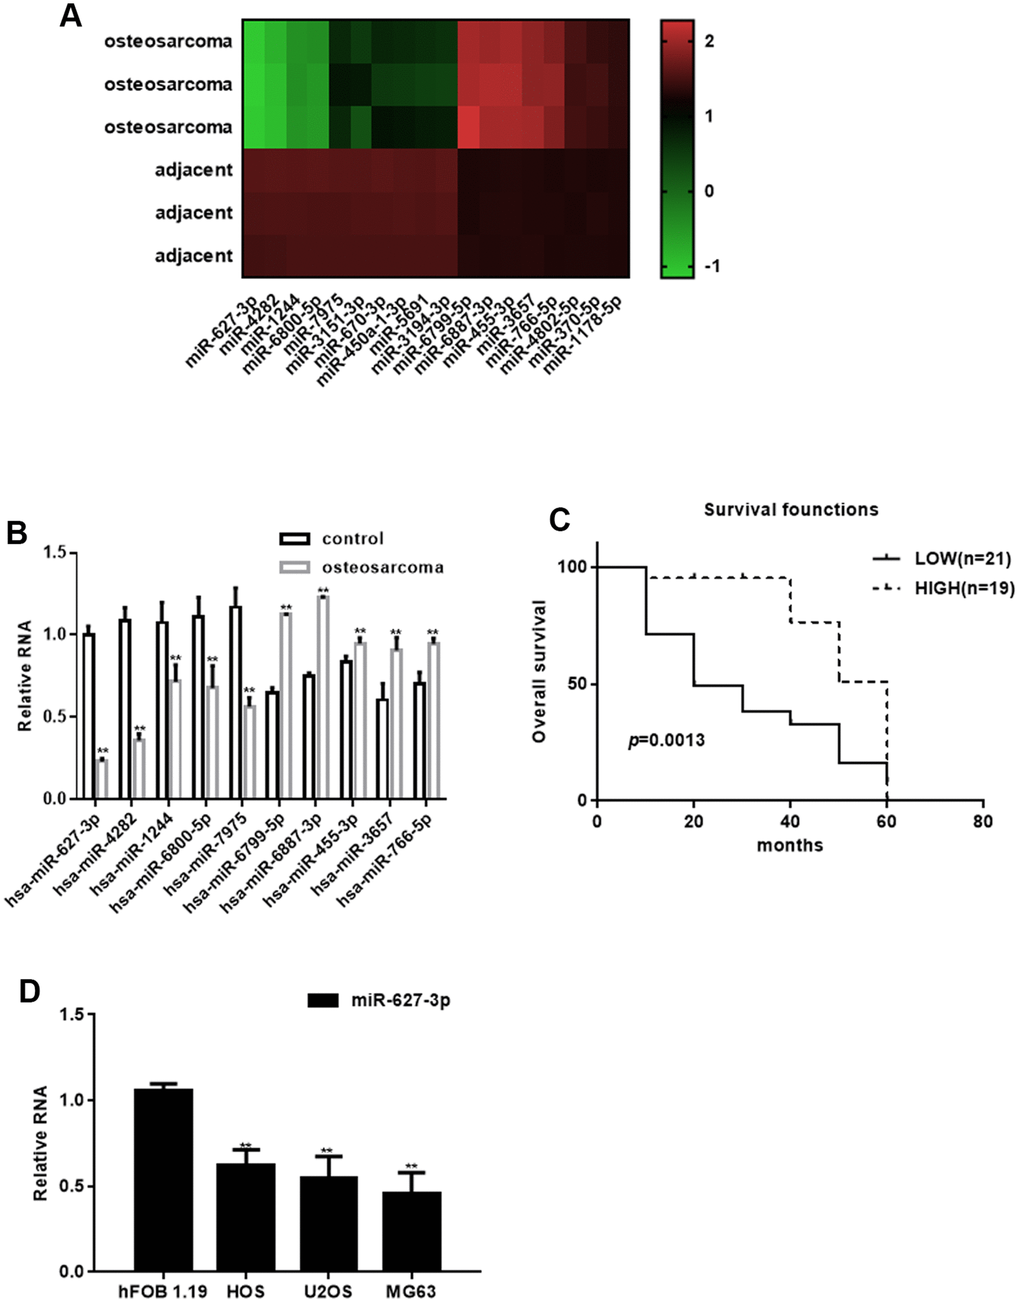 Identification of differentially expressed miRNAs in osteosarcoma. (A) Heat map summarizing the results of a microarray analysis. (B) Real time PCR analysis of miRNA expression in osteosarcoma tissues and adjacent tissues. ** PC) Relationship between miR-627-3p expression and the survival period among osteosarcoma patients. (D) Real time PCR analysis of miR-627-3p expression in hFOB 1.19, HOS, U2OS and MG63 cells. ** P